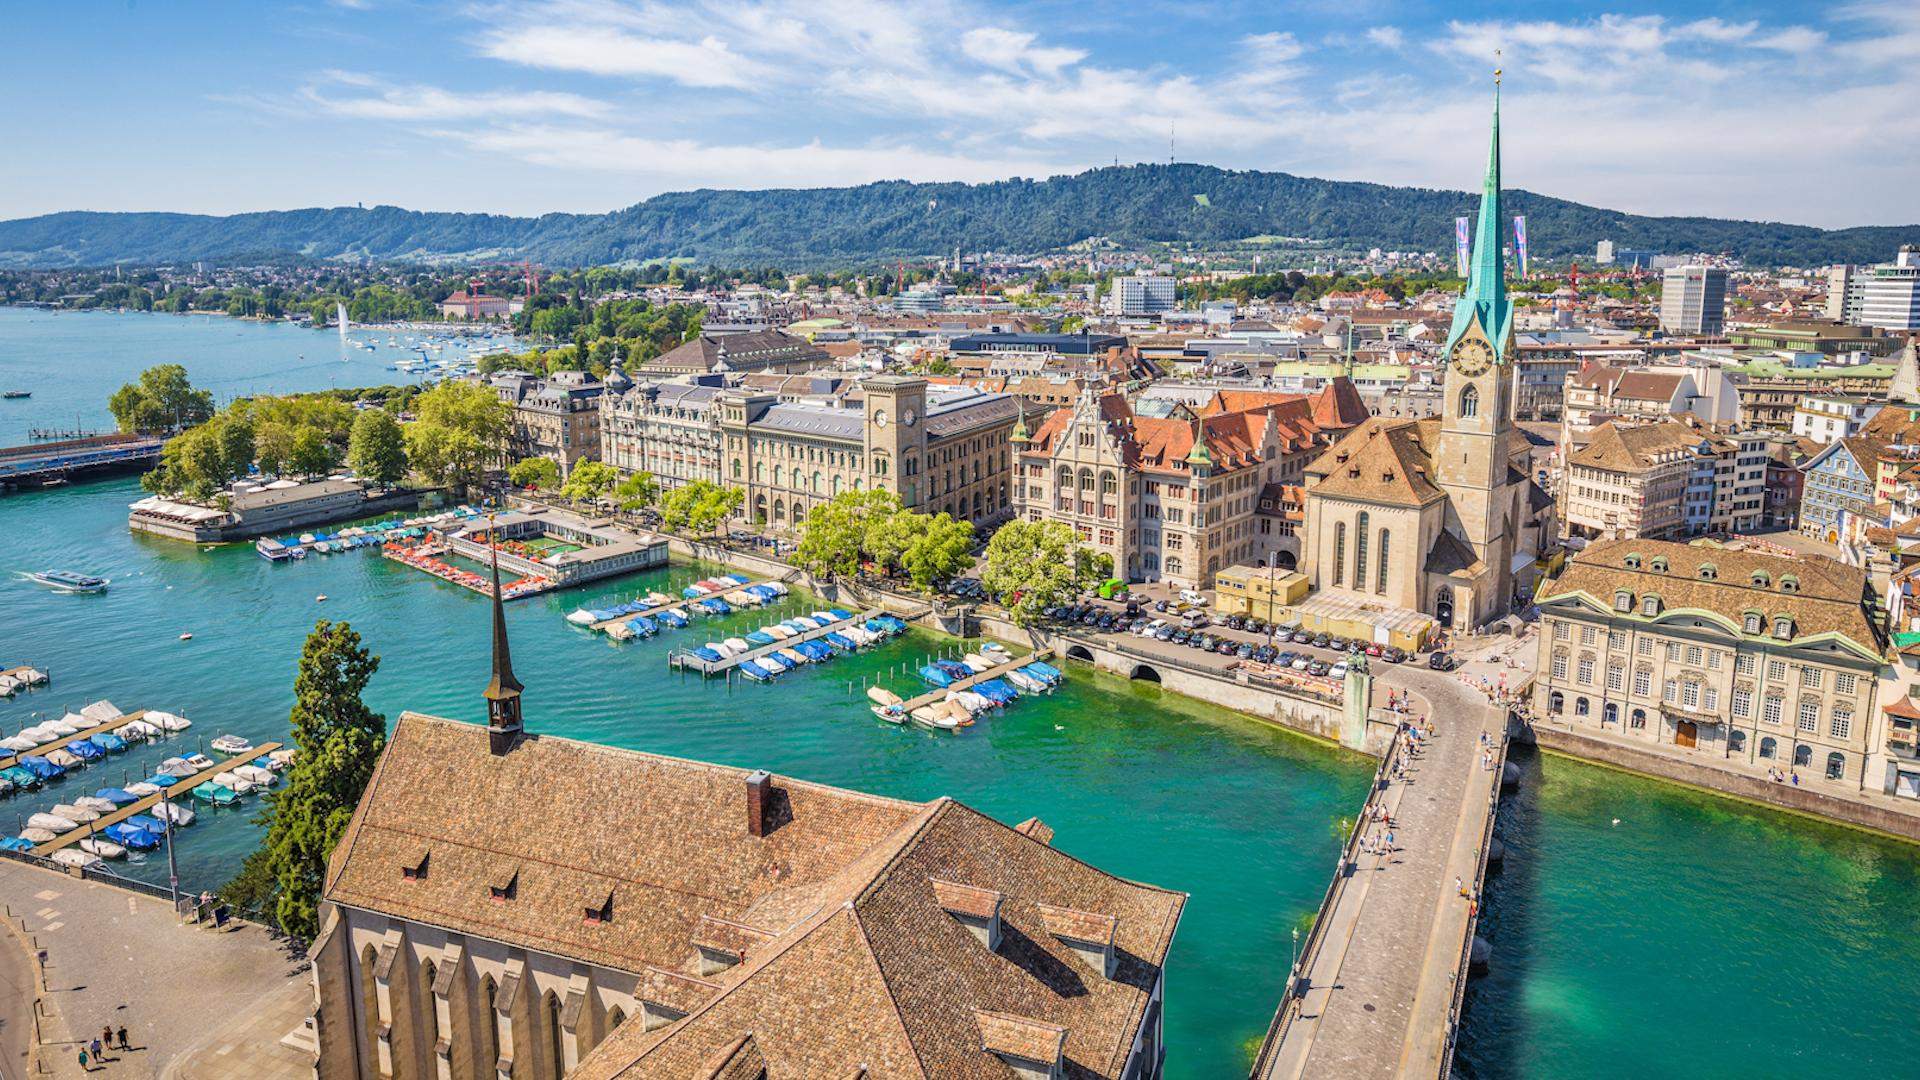 Featured image for “Zurich to start testing recreational marijuana use this year”